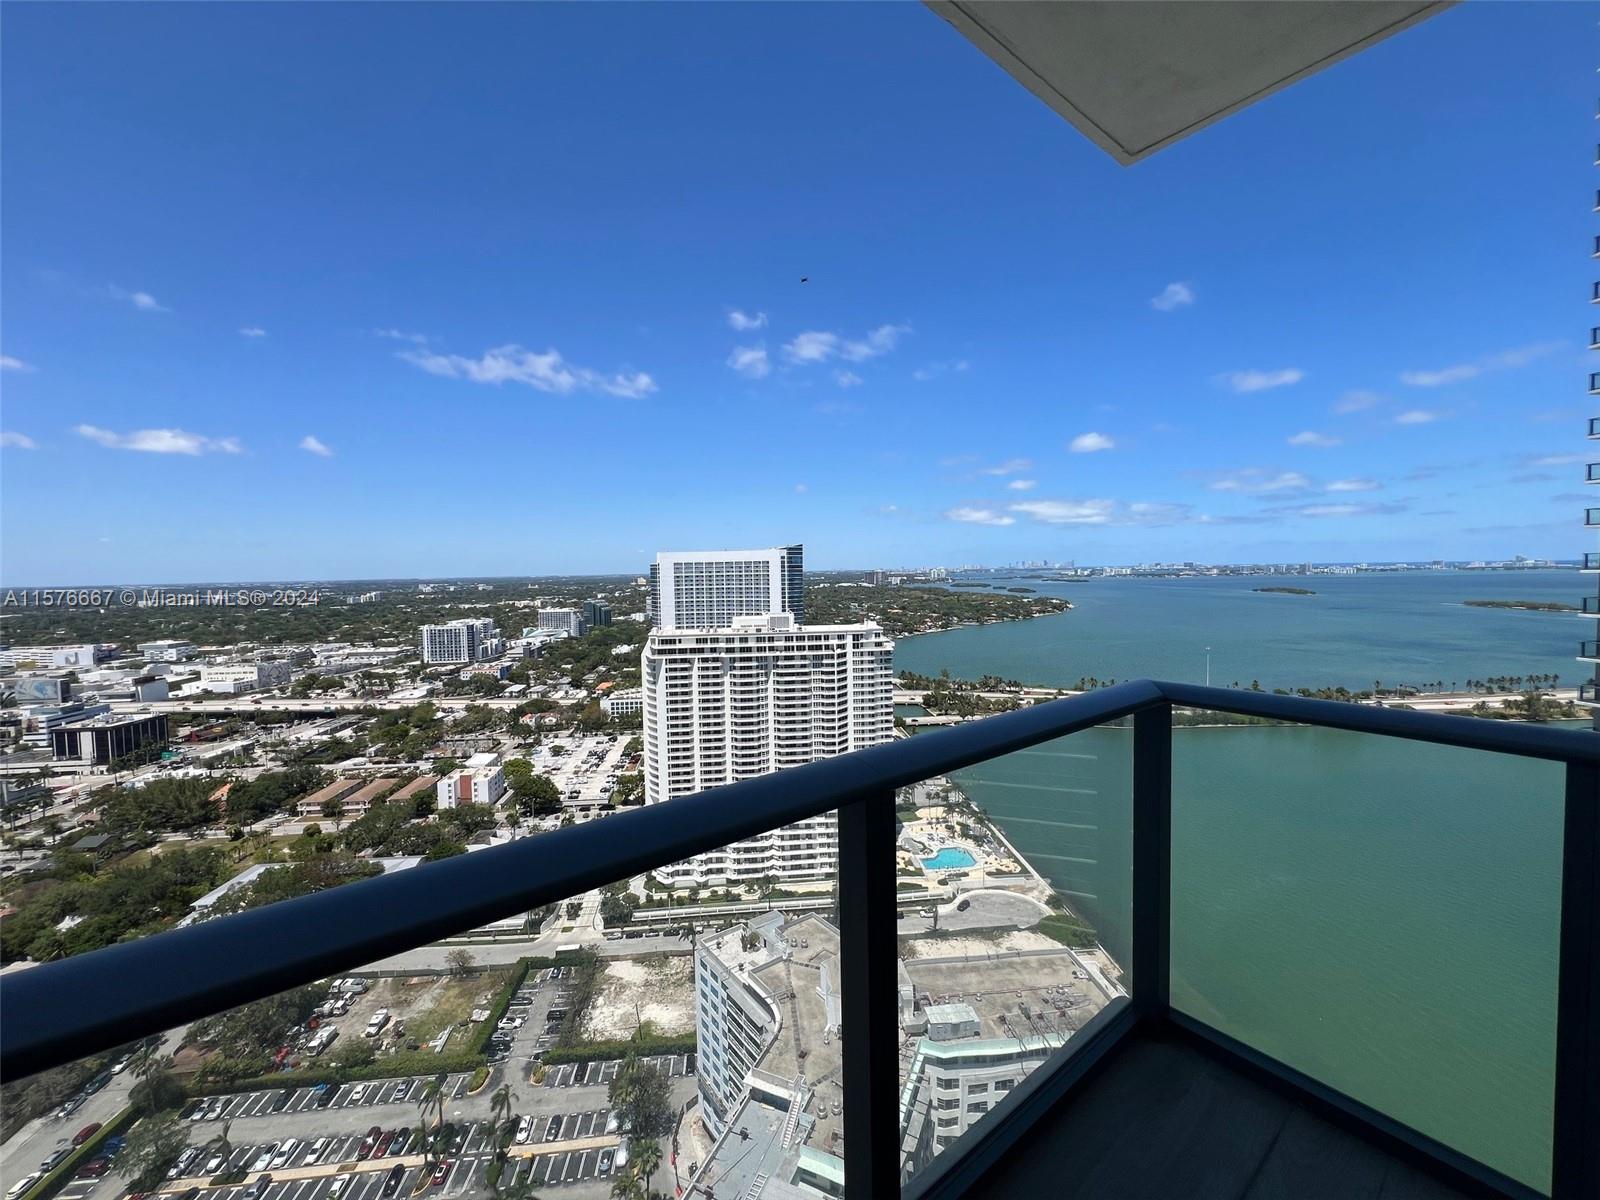 Amazing corner unit 1 bed | 1.5 bath direct breathtaking water views of Biscayne Bay. Blinds and blackouts, custom closet, Bosh appliances, top of the line finishes. Custom-made closet. Unit comes with 1 assigned parking space. Luxurious amenities include golf simulator, theater room, SPA, wine cellars, and tennis courts. Paraiso Bay is an exclusive & luxury community in Edgewater close to Wynwood, Design District, Midtown, Downtown & Brickell.